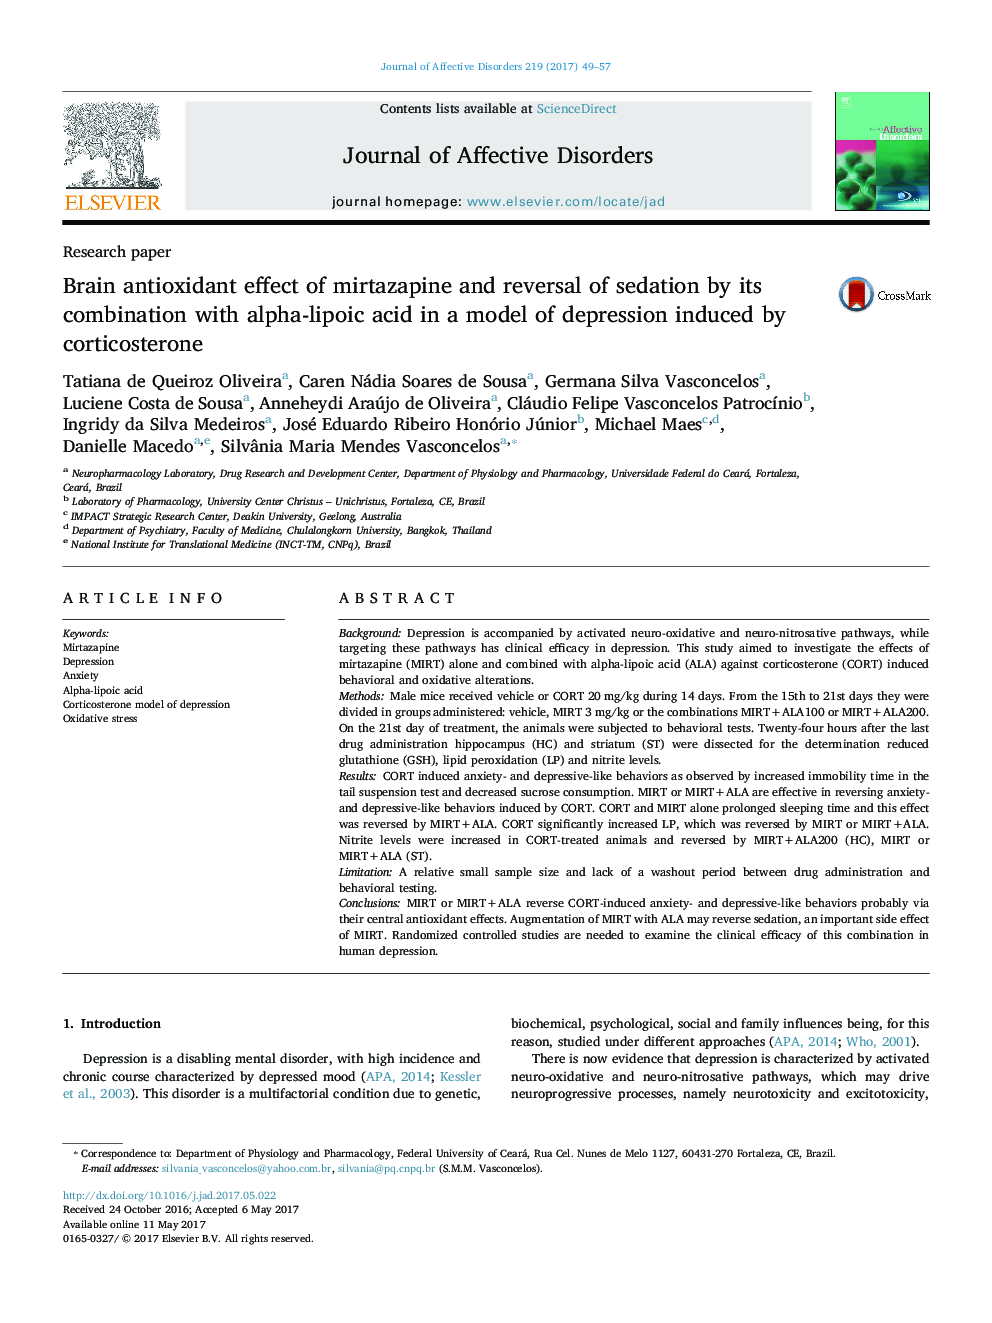 Research paperBrain antioxidant effect of mirtazapine and reversal of sedation by its combination with alpha-lipoic acid in a model of depression induced by corticosterone